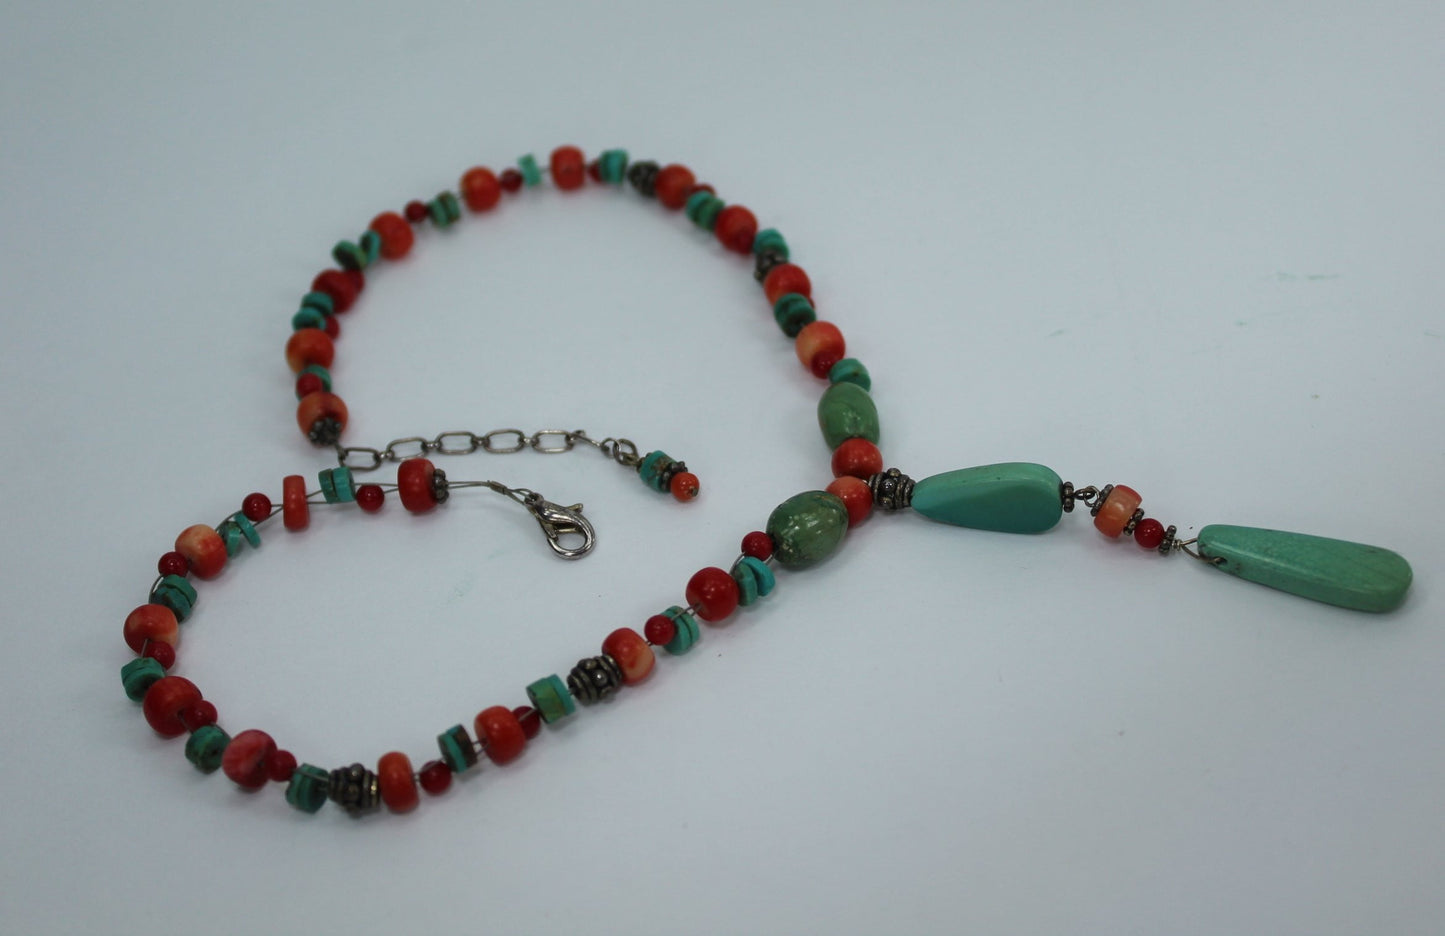 Necklace Turquoise Coral Red Stones Silver Beads Variety Shapes Great Feel Look